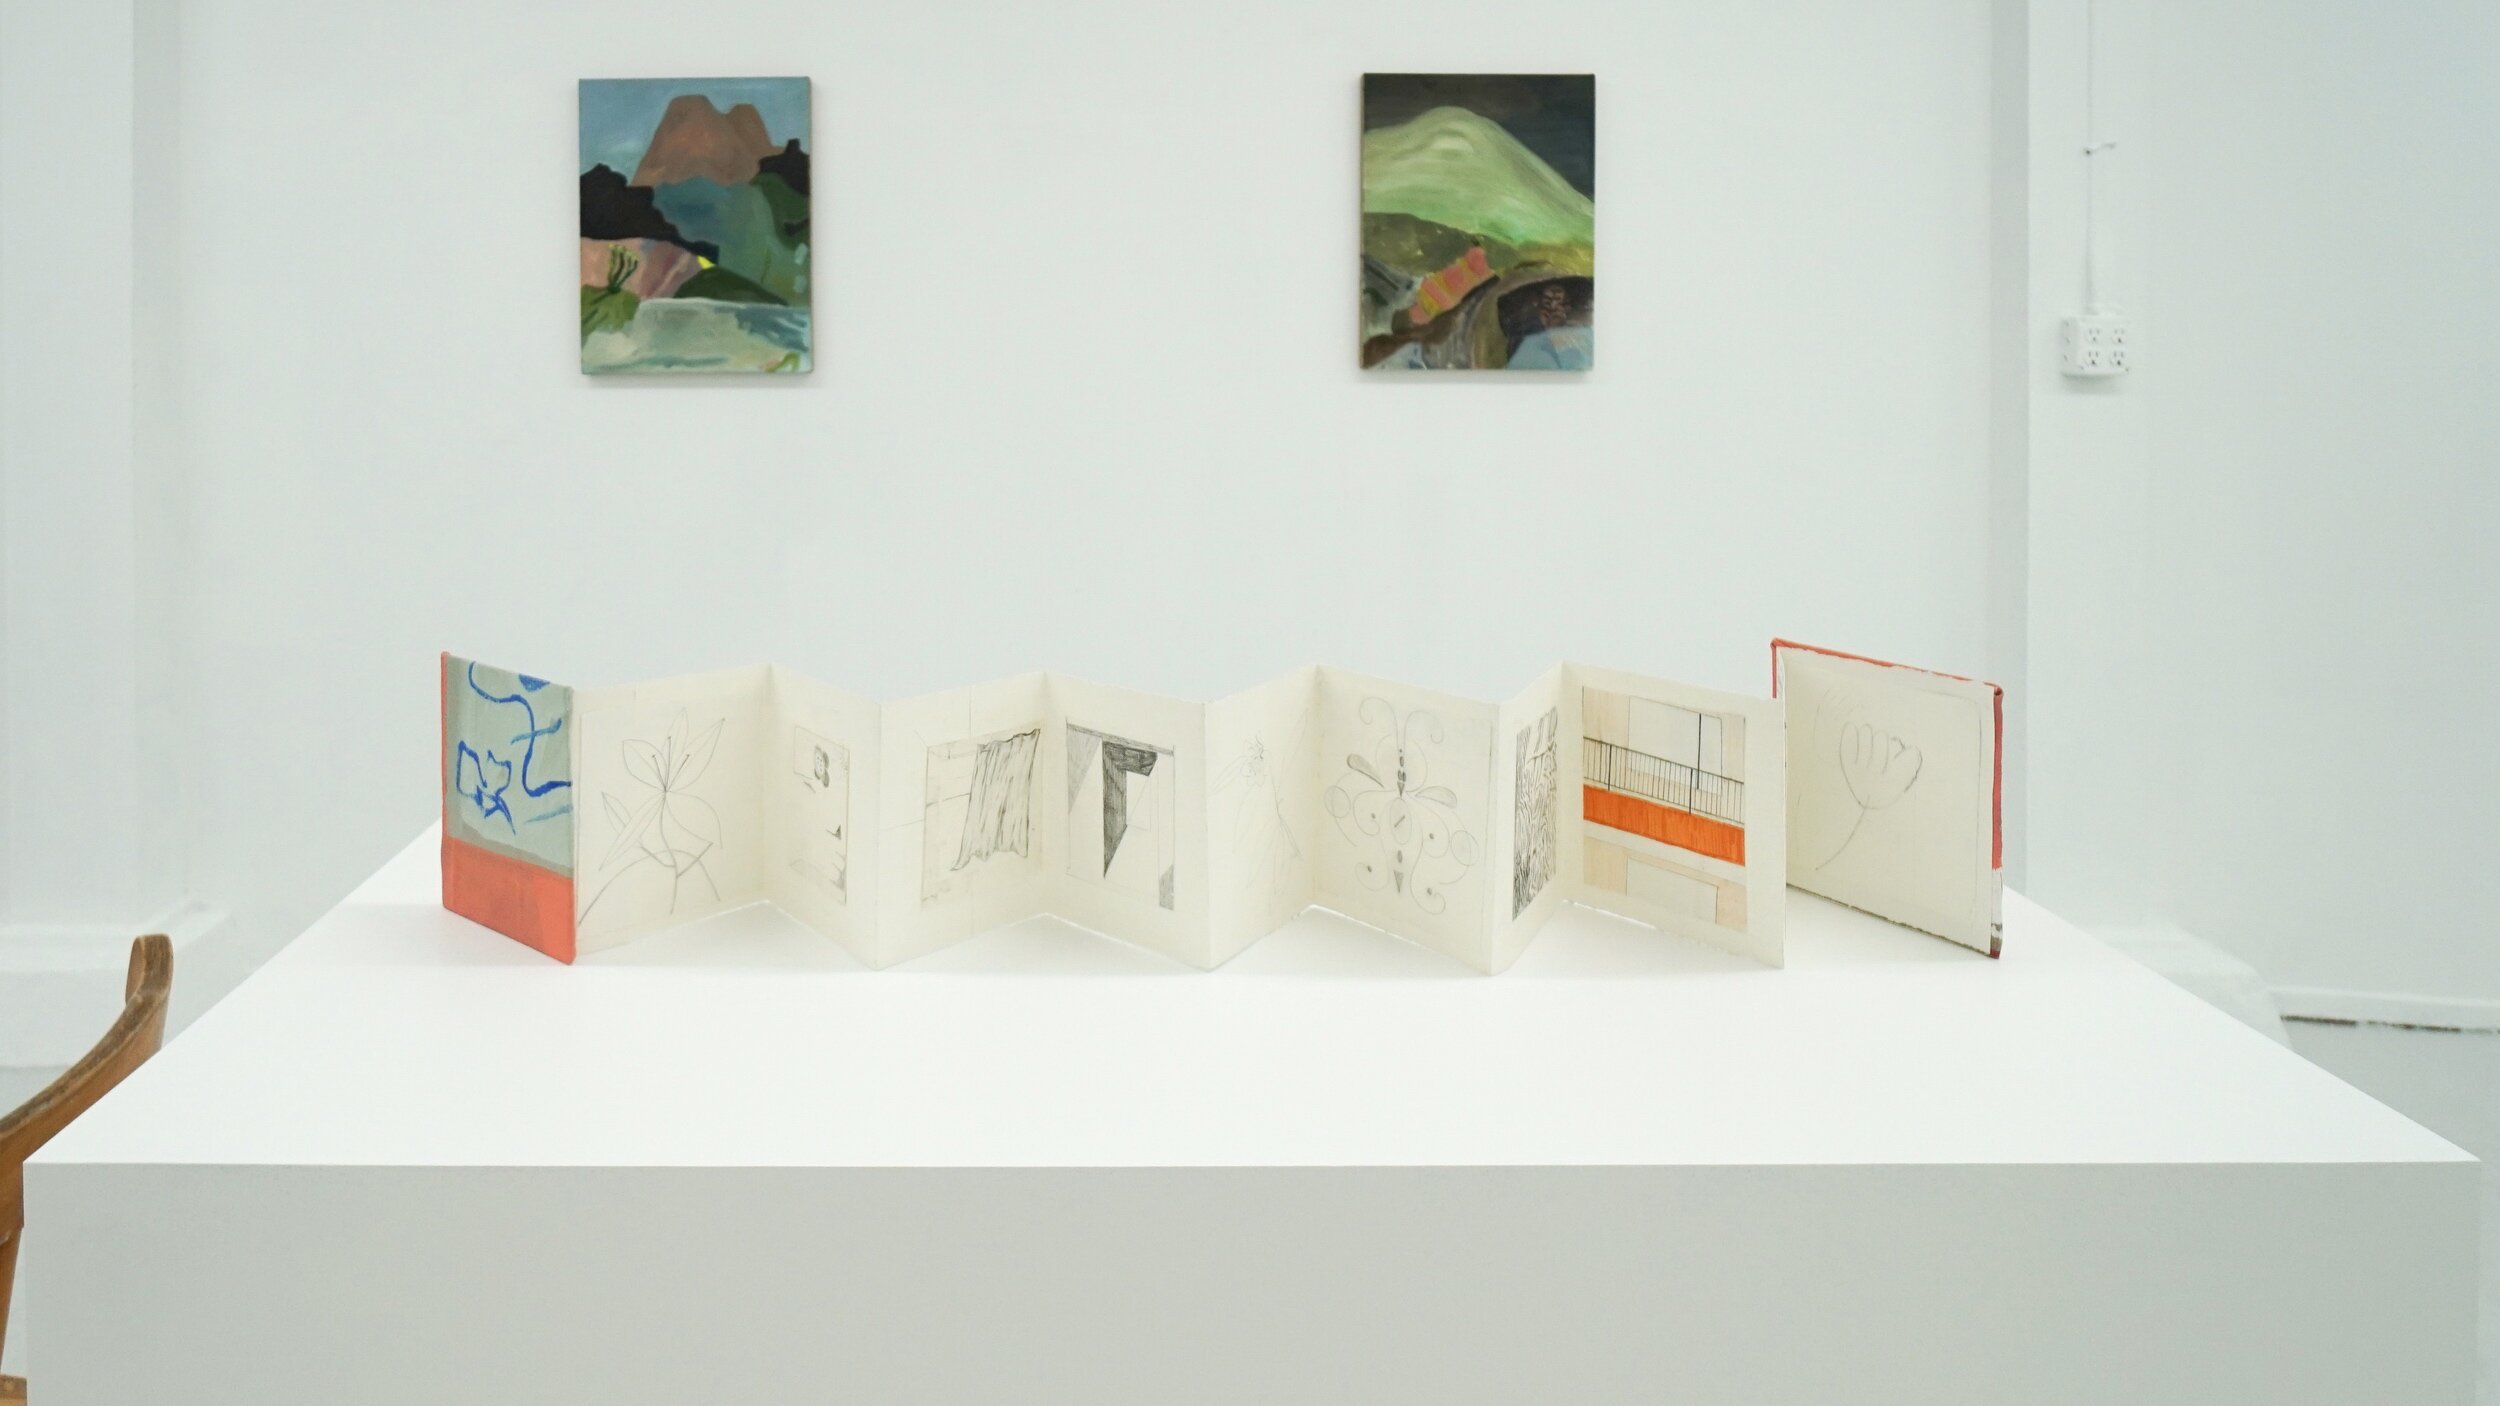 installation view,  Justine Rivas 'The Lake', 2021  Linen, oil, pencil, paper, hinging tape  6 x 5.5 inches (closed)